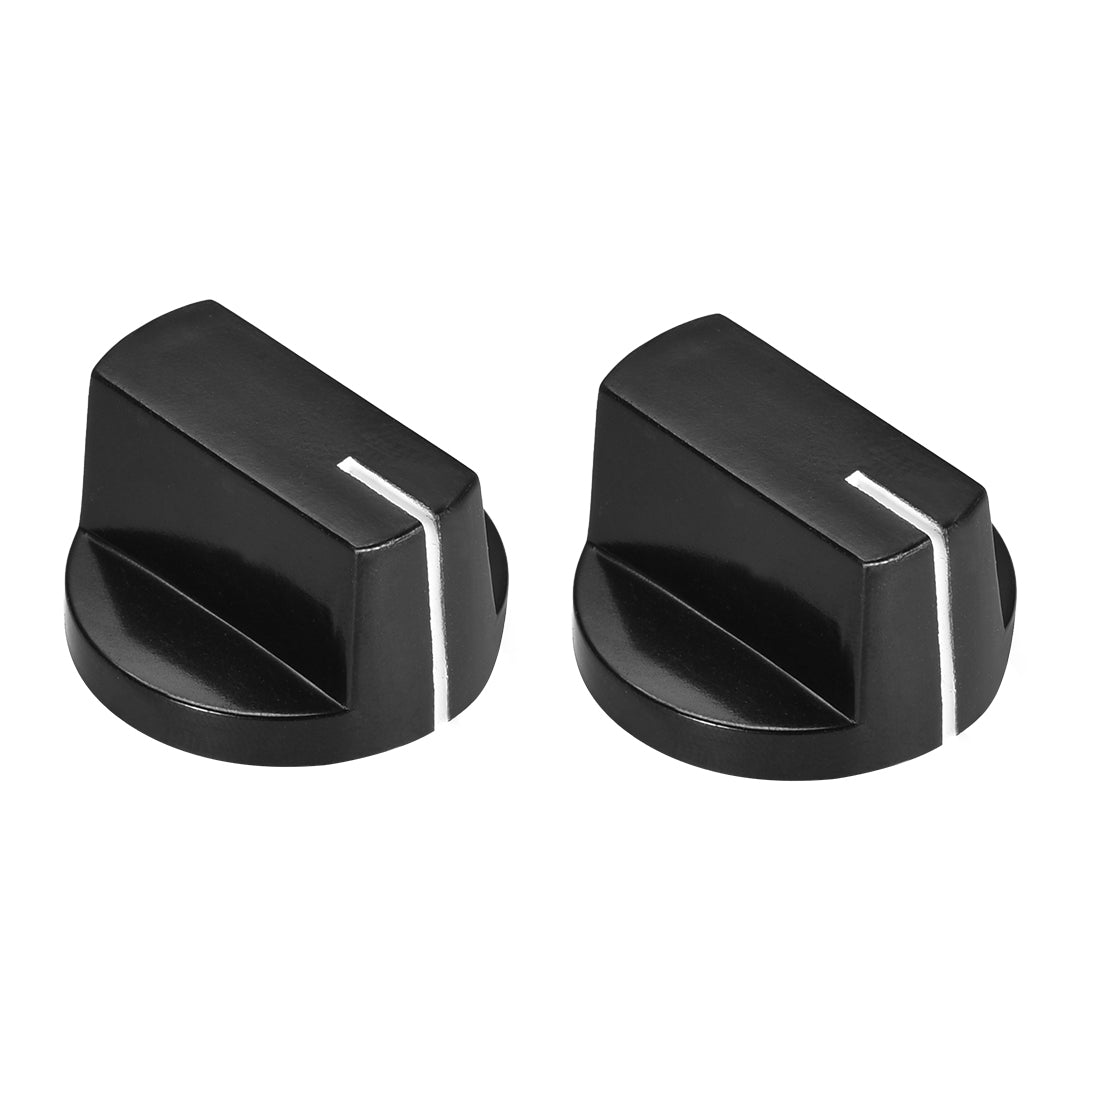 uxcell Uxcell 2pcs, 6mm Potentiometer Control Knobs For Guitar Acrylic Volume Tone Knobs Black